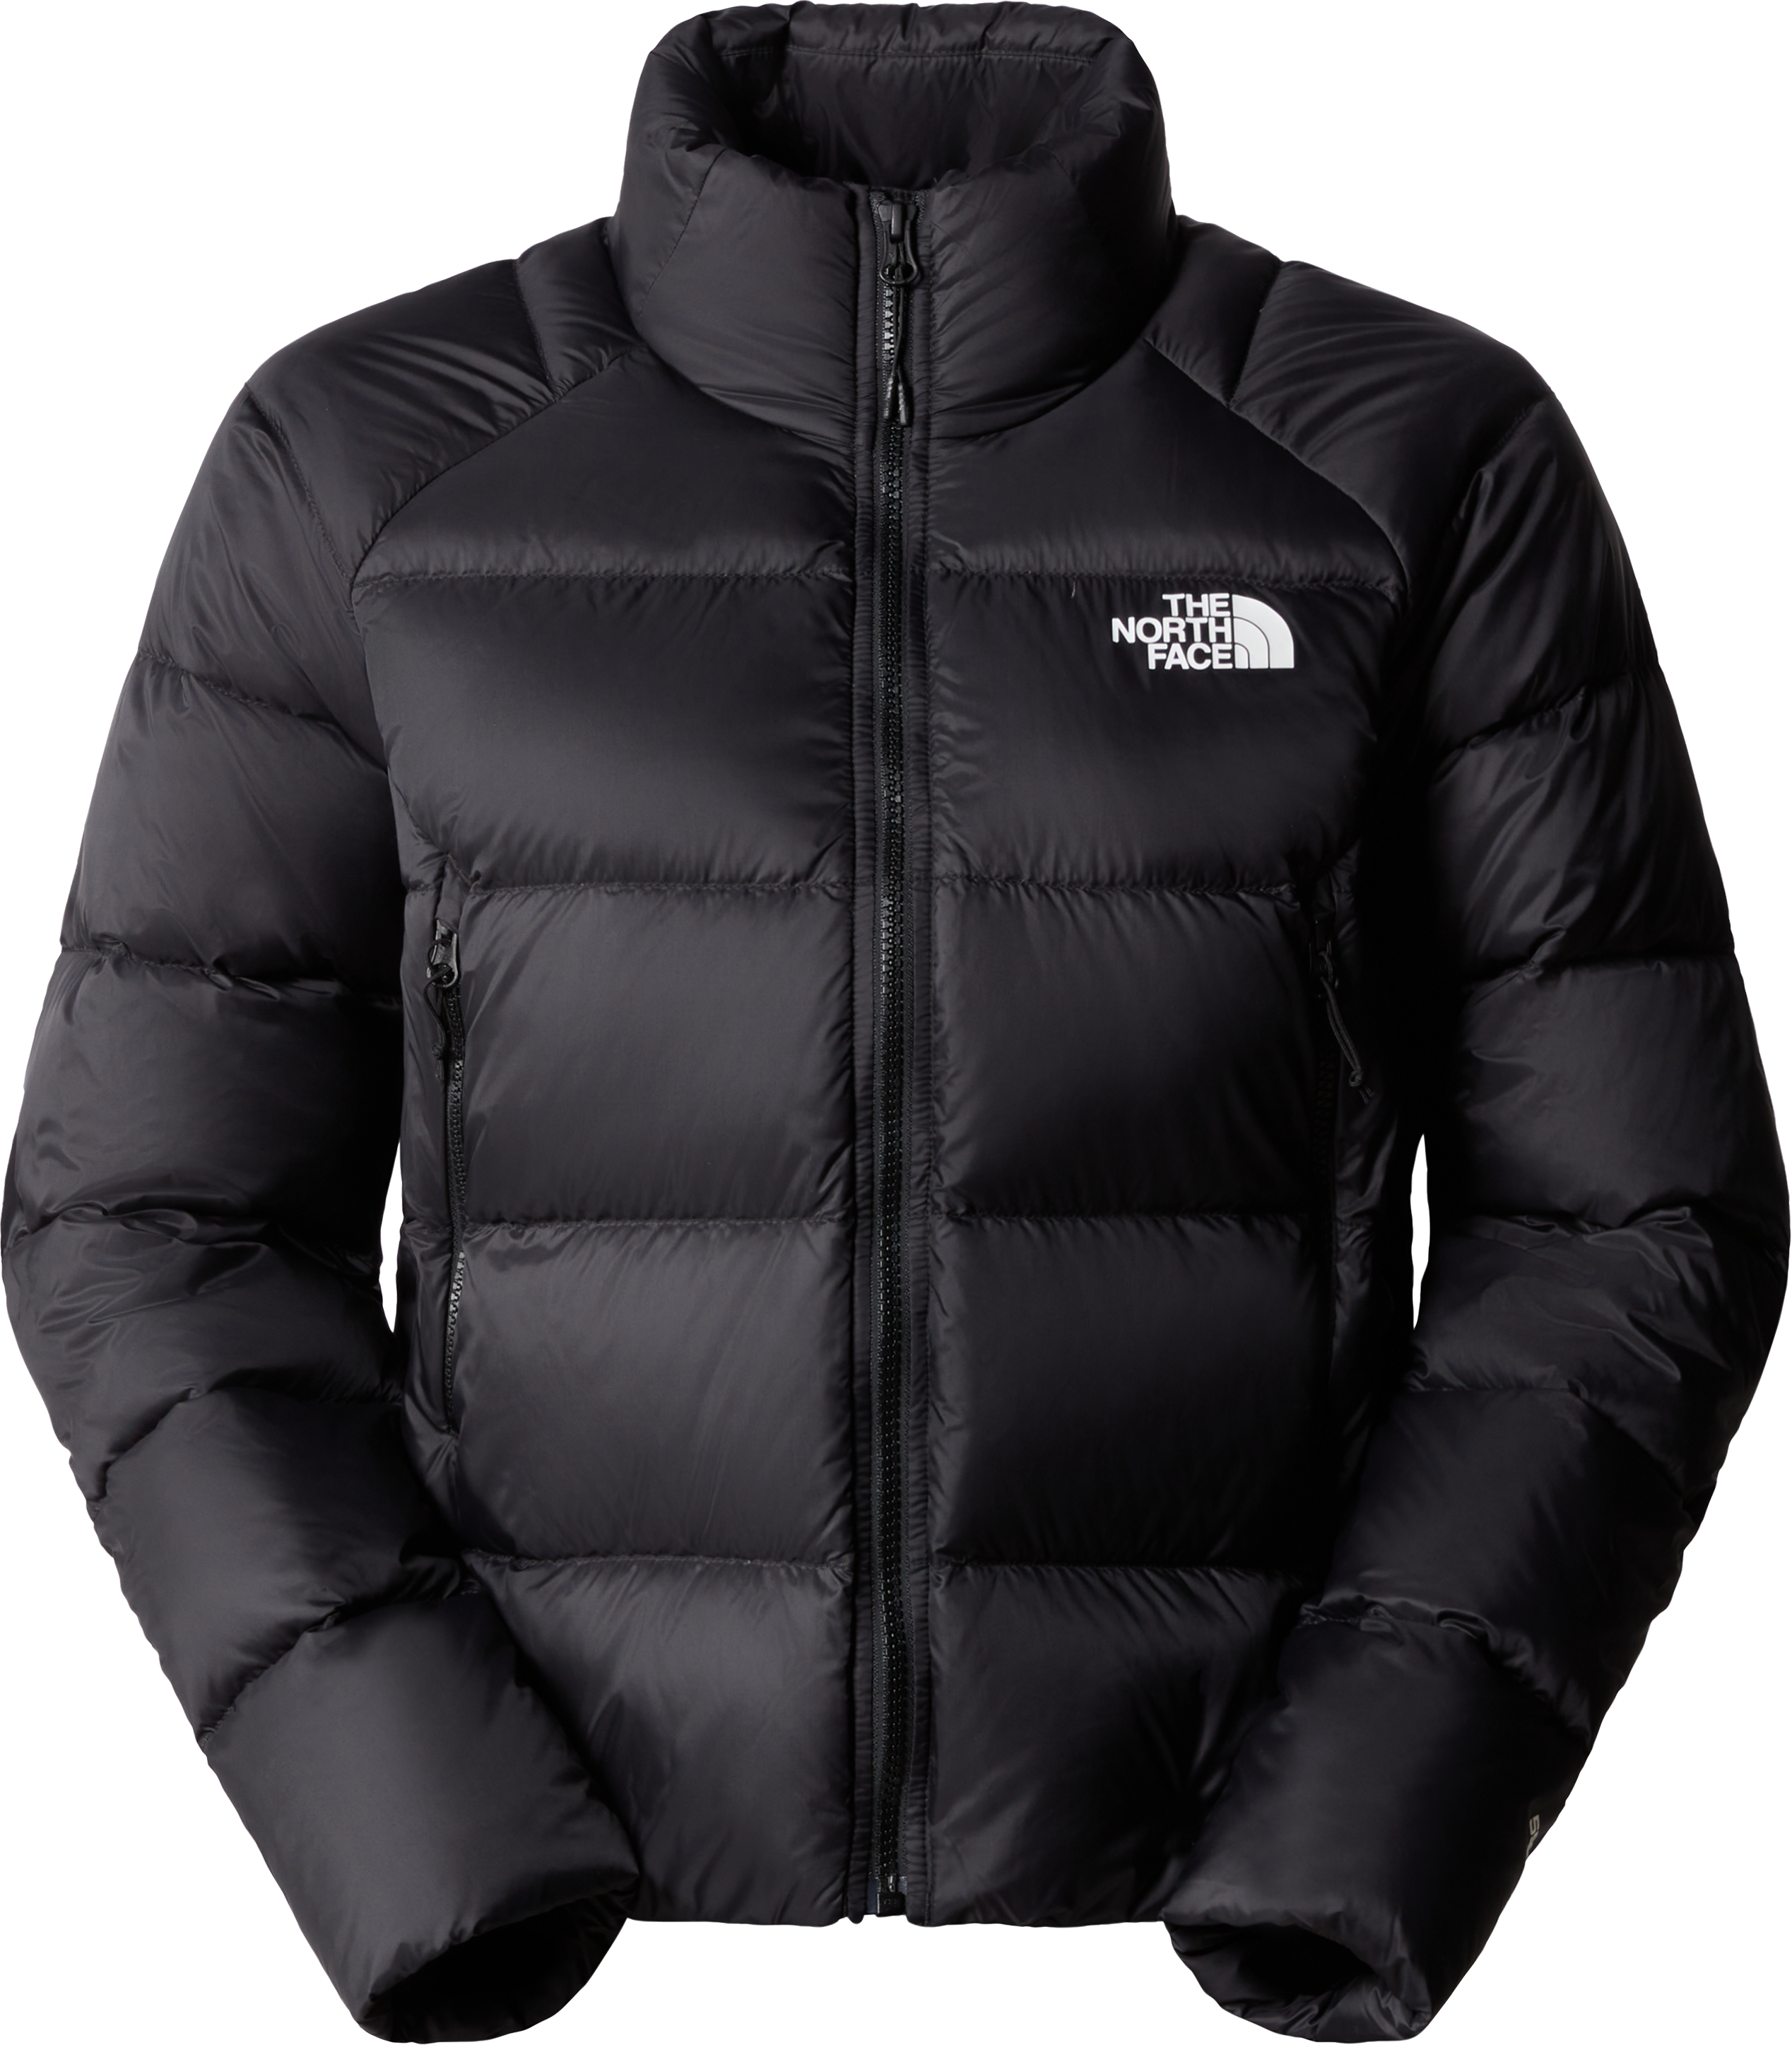 The North Face Women’s Hyalite Down Jacket Tnf Black